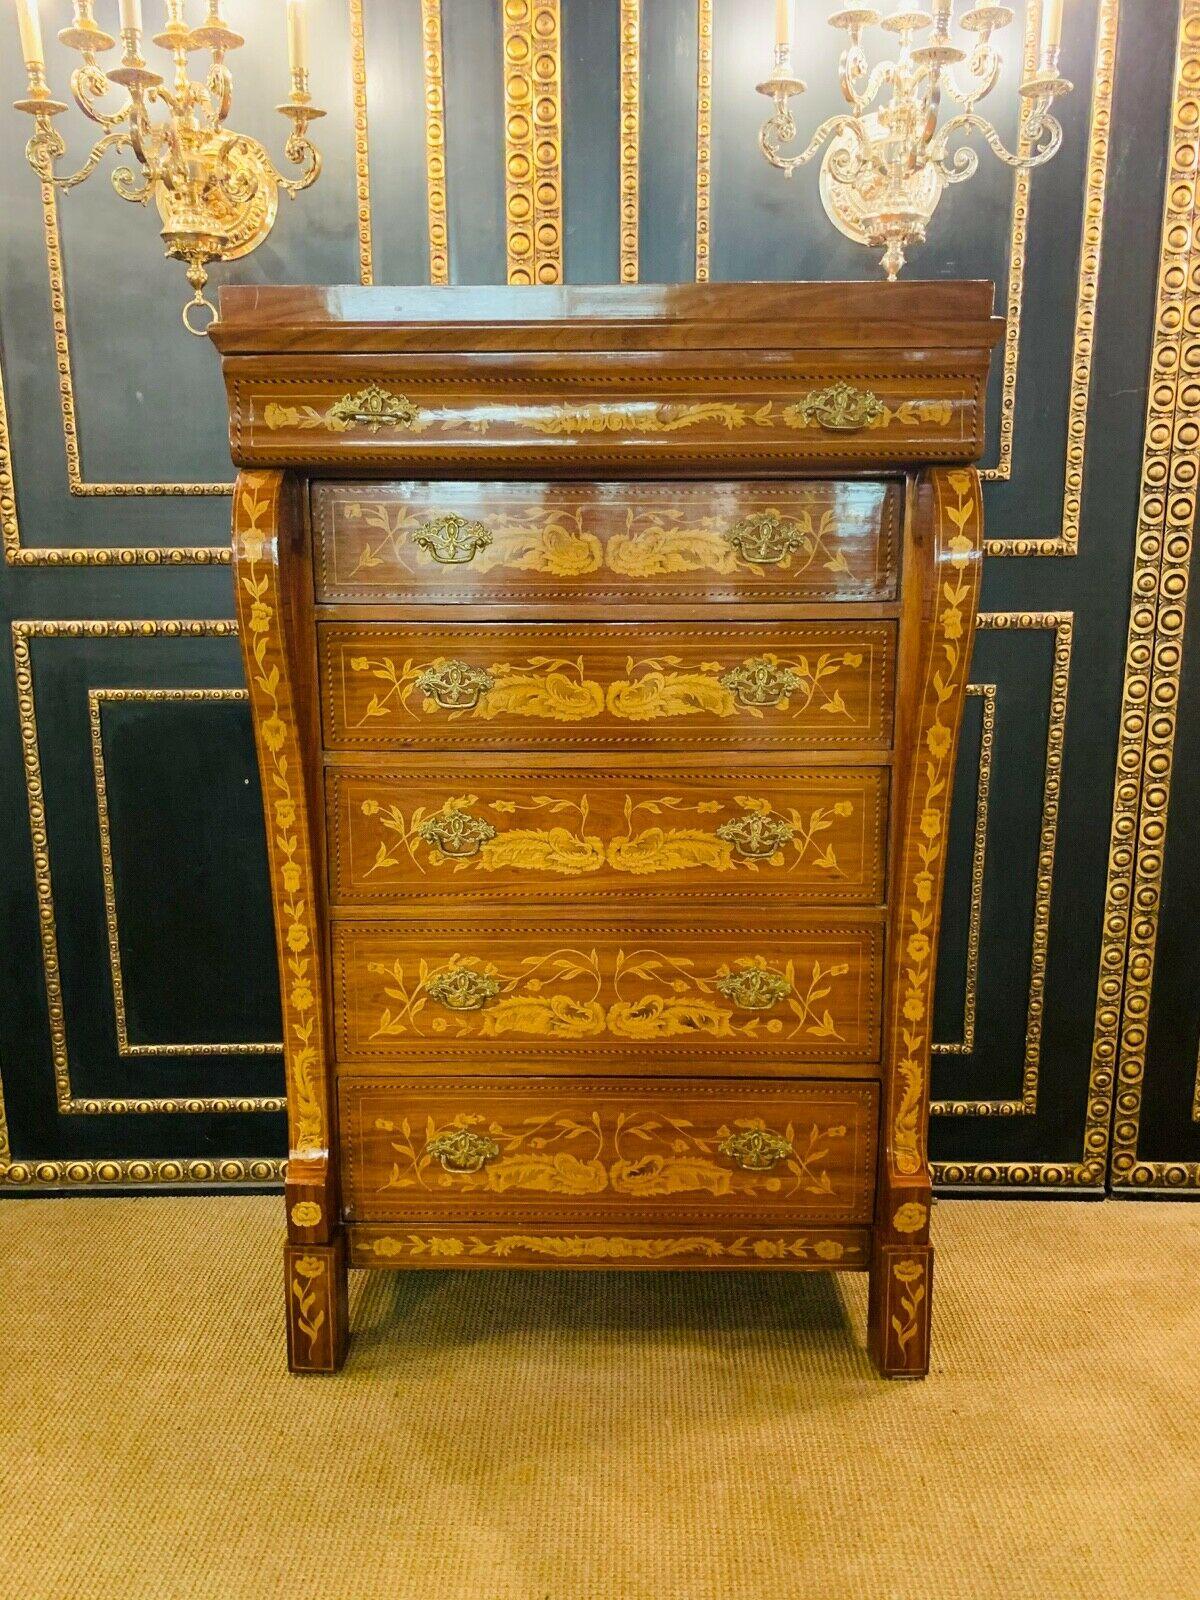 Chiffionere / men's chest of drawers with 6 drawers in Dutch baroque style inlaid with floral inlays.
Right and left with beautiful volute-like flat columns.
Solid wood with exotic veneer.